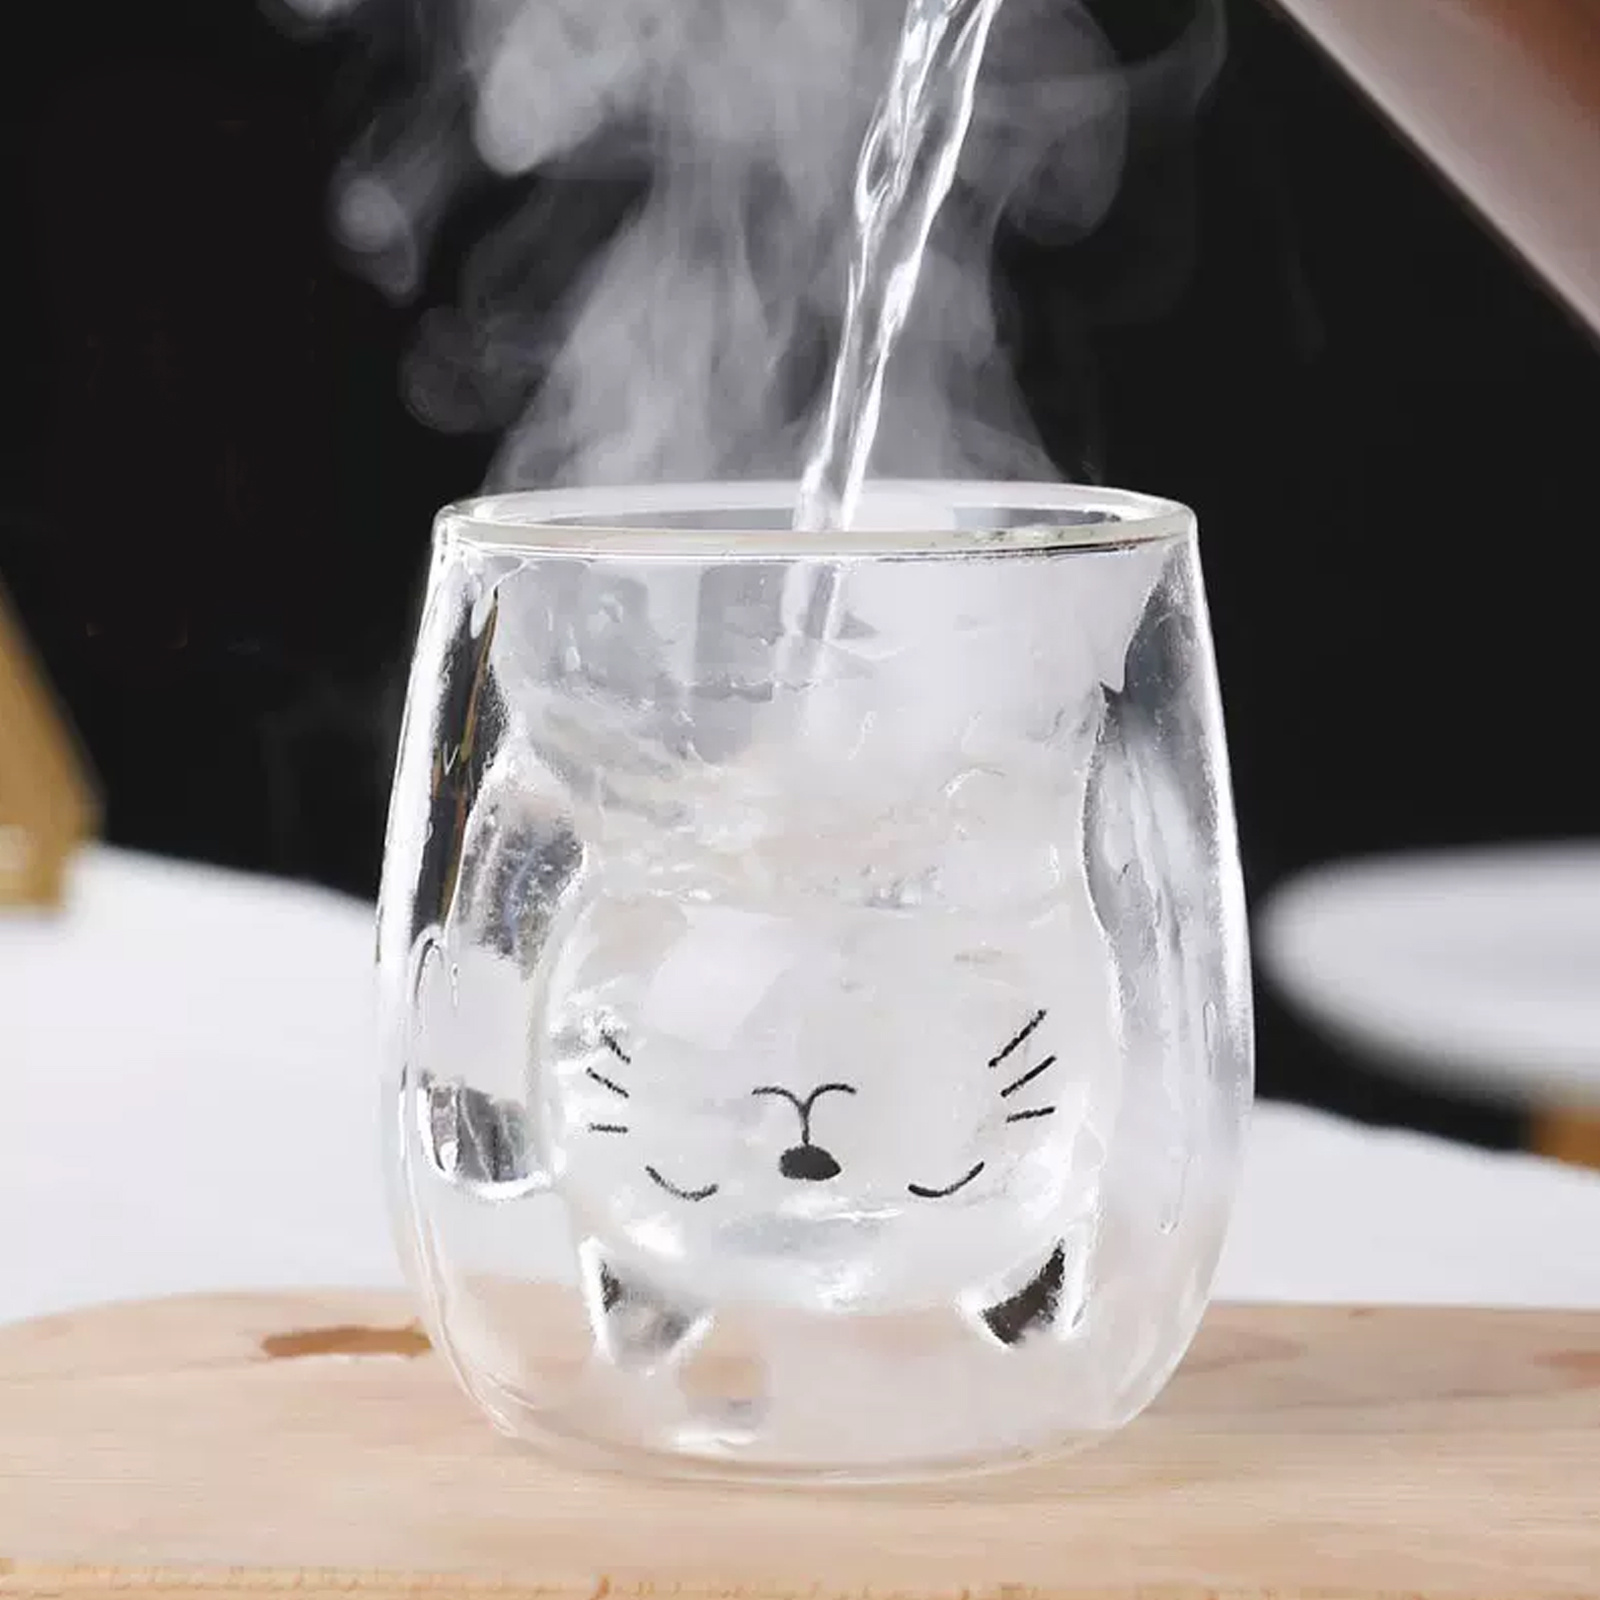 Where to Buy Cute Double-Walled Glasses